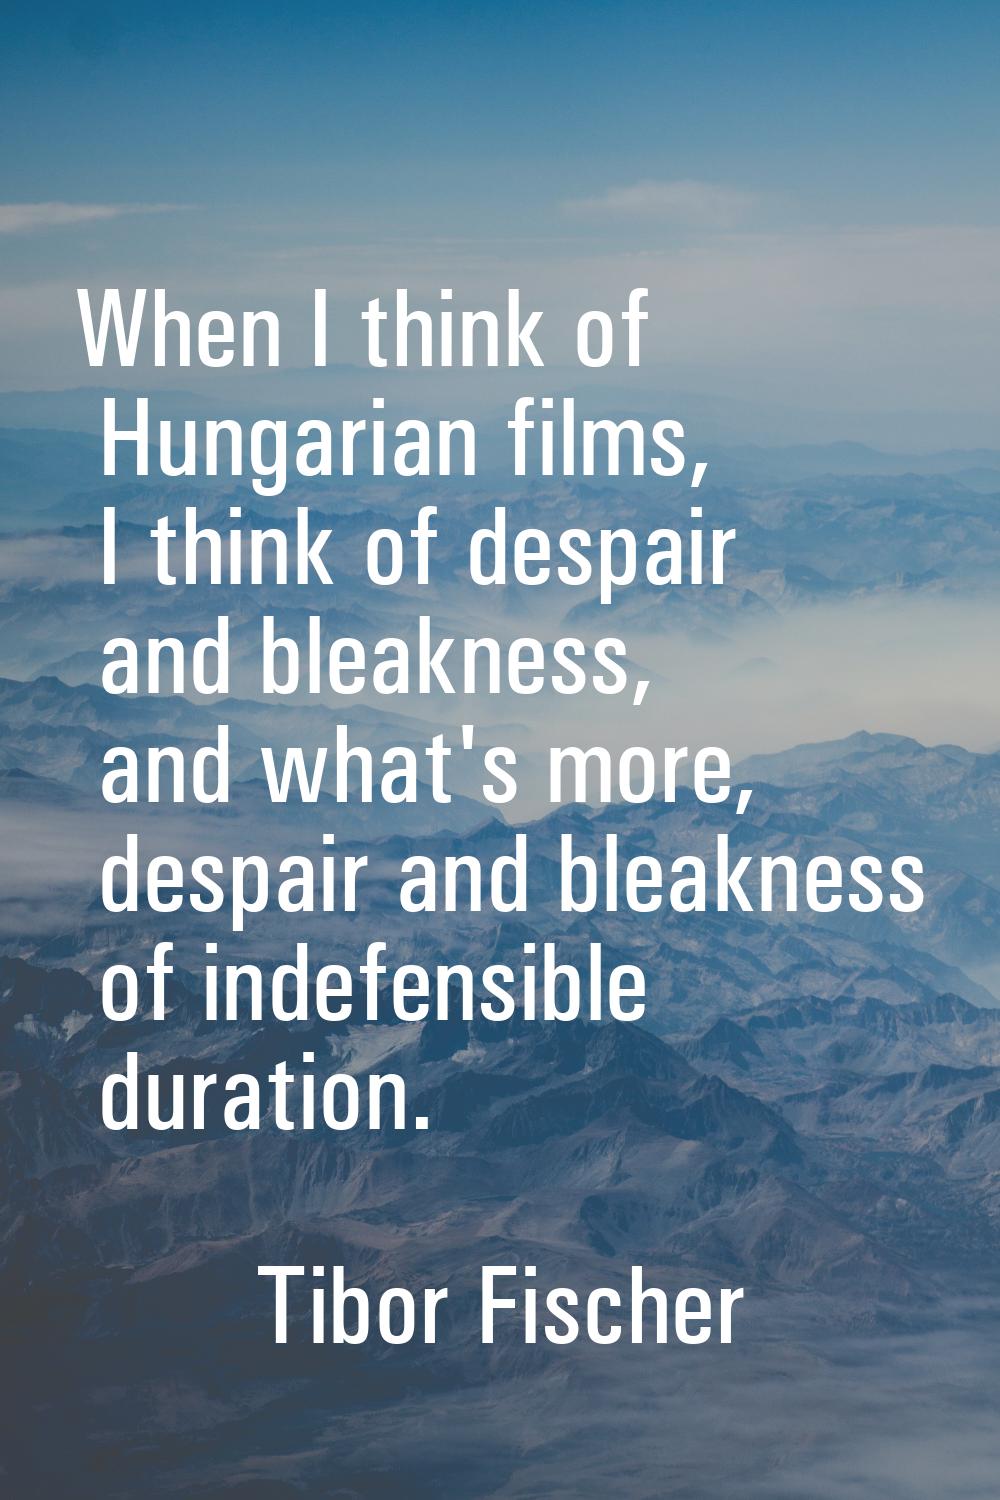 When I think of Hungarian films, I think of despair and bleakness, and what's more, despair and ble